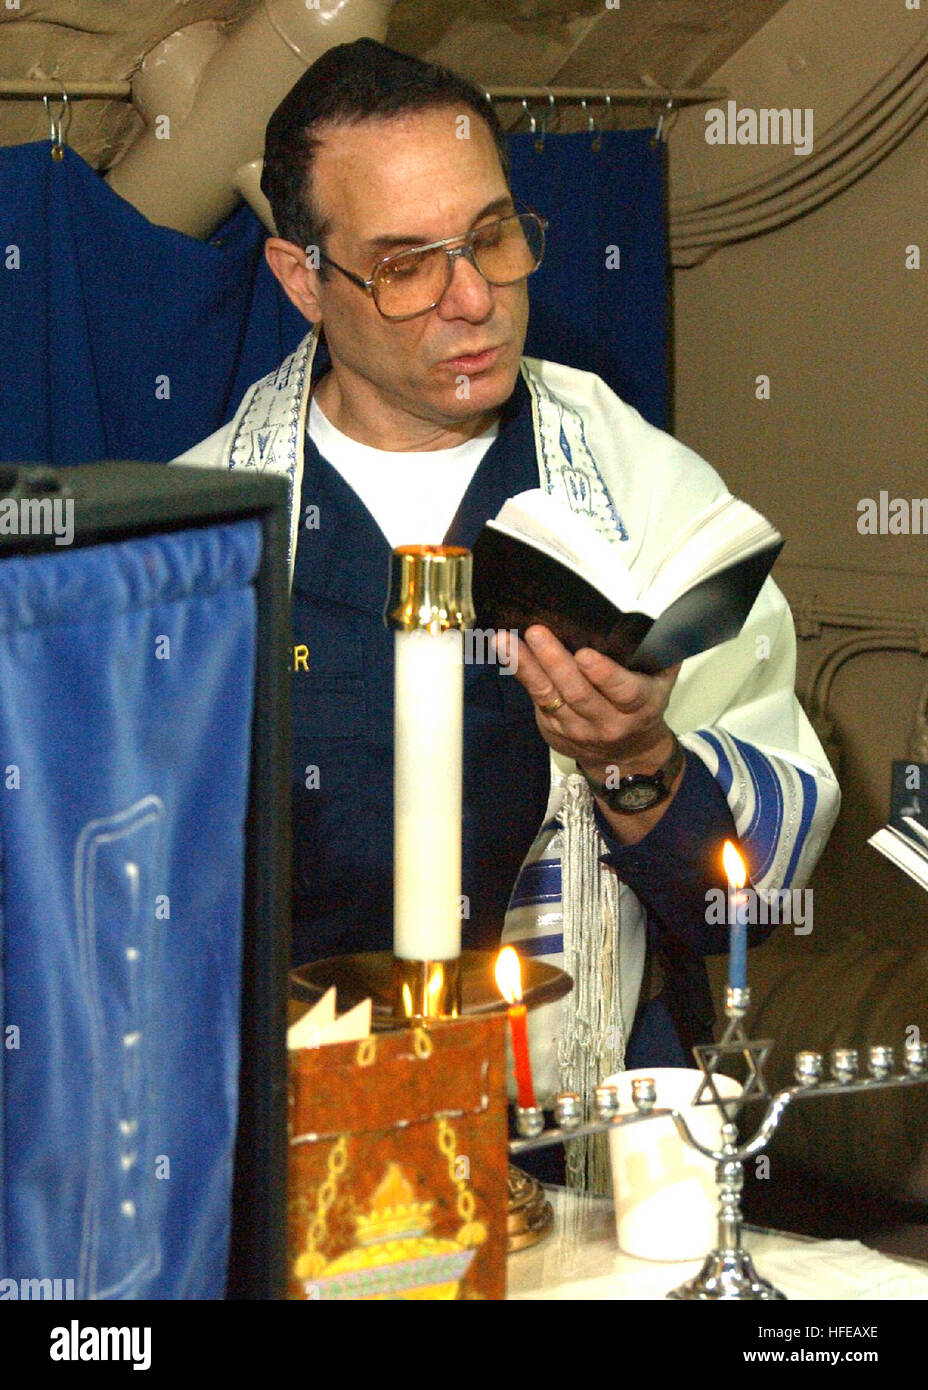 021130-N-1159M-002 At sea aboard USS Abraham Lincoln (CVN 72) Nov. 30, 2002 -- A Jewish chaplain conducts services aboard the aircraft carrier.  Chaplains of all faiths serve aboard ships around the world, bringing counseling and spiritual sustenance to Sailors at sea.   In 1941, during the attack on Pearl Harbor, Hawaii, it was a Navy Chaplain who is said to have uttered the legendary battle cry 'Praise the Lord and pass the ammunition!'  Over the last few years, the Muslim and Buddhist faiths have been added to the Chaplain Corps.  U.S. Navy Photo.  (RELEASED) US Navy 021130-N-1159M-002 Jewi Stock Photo